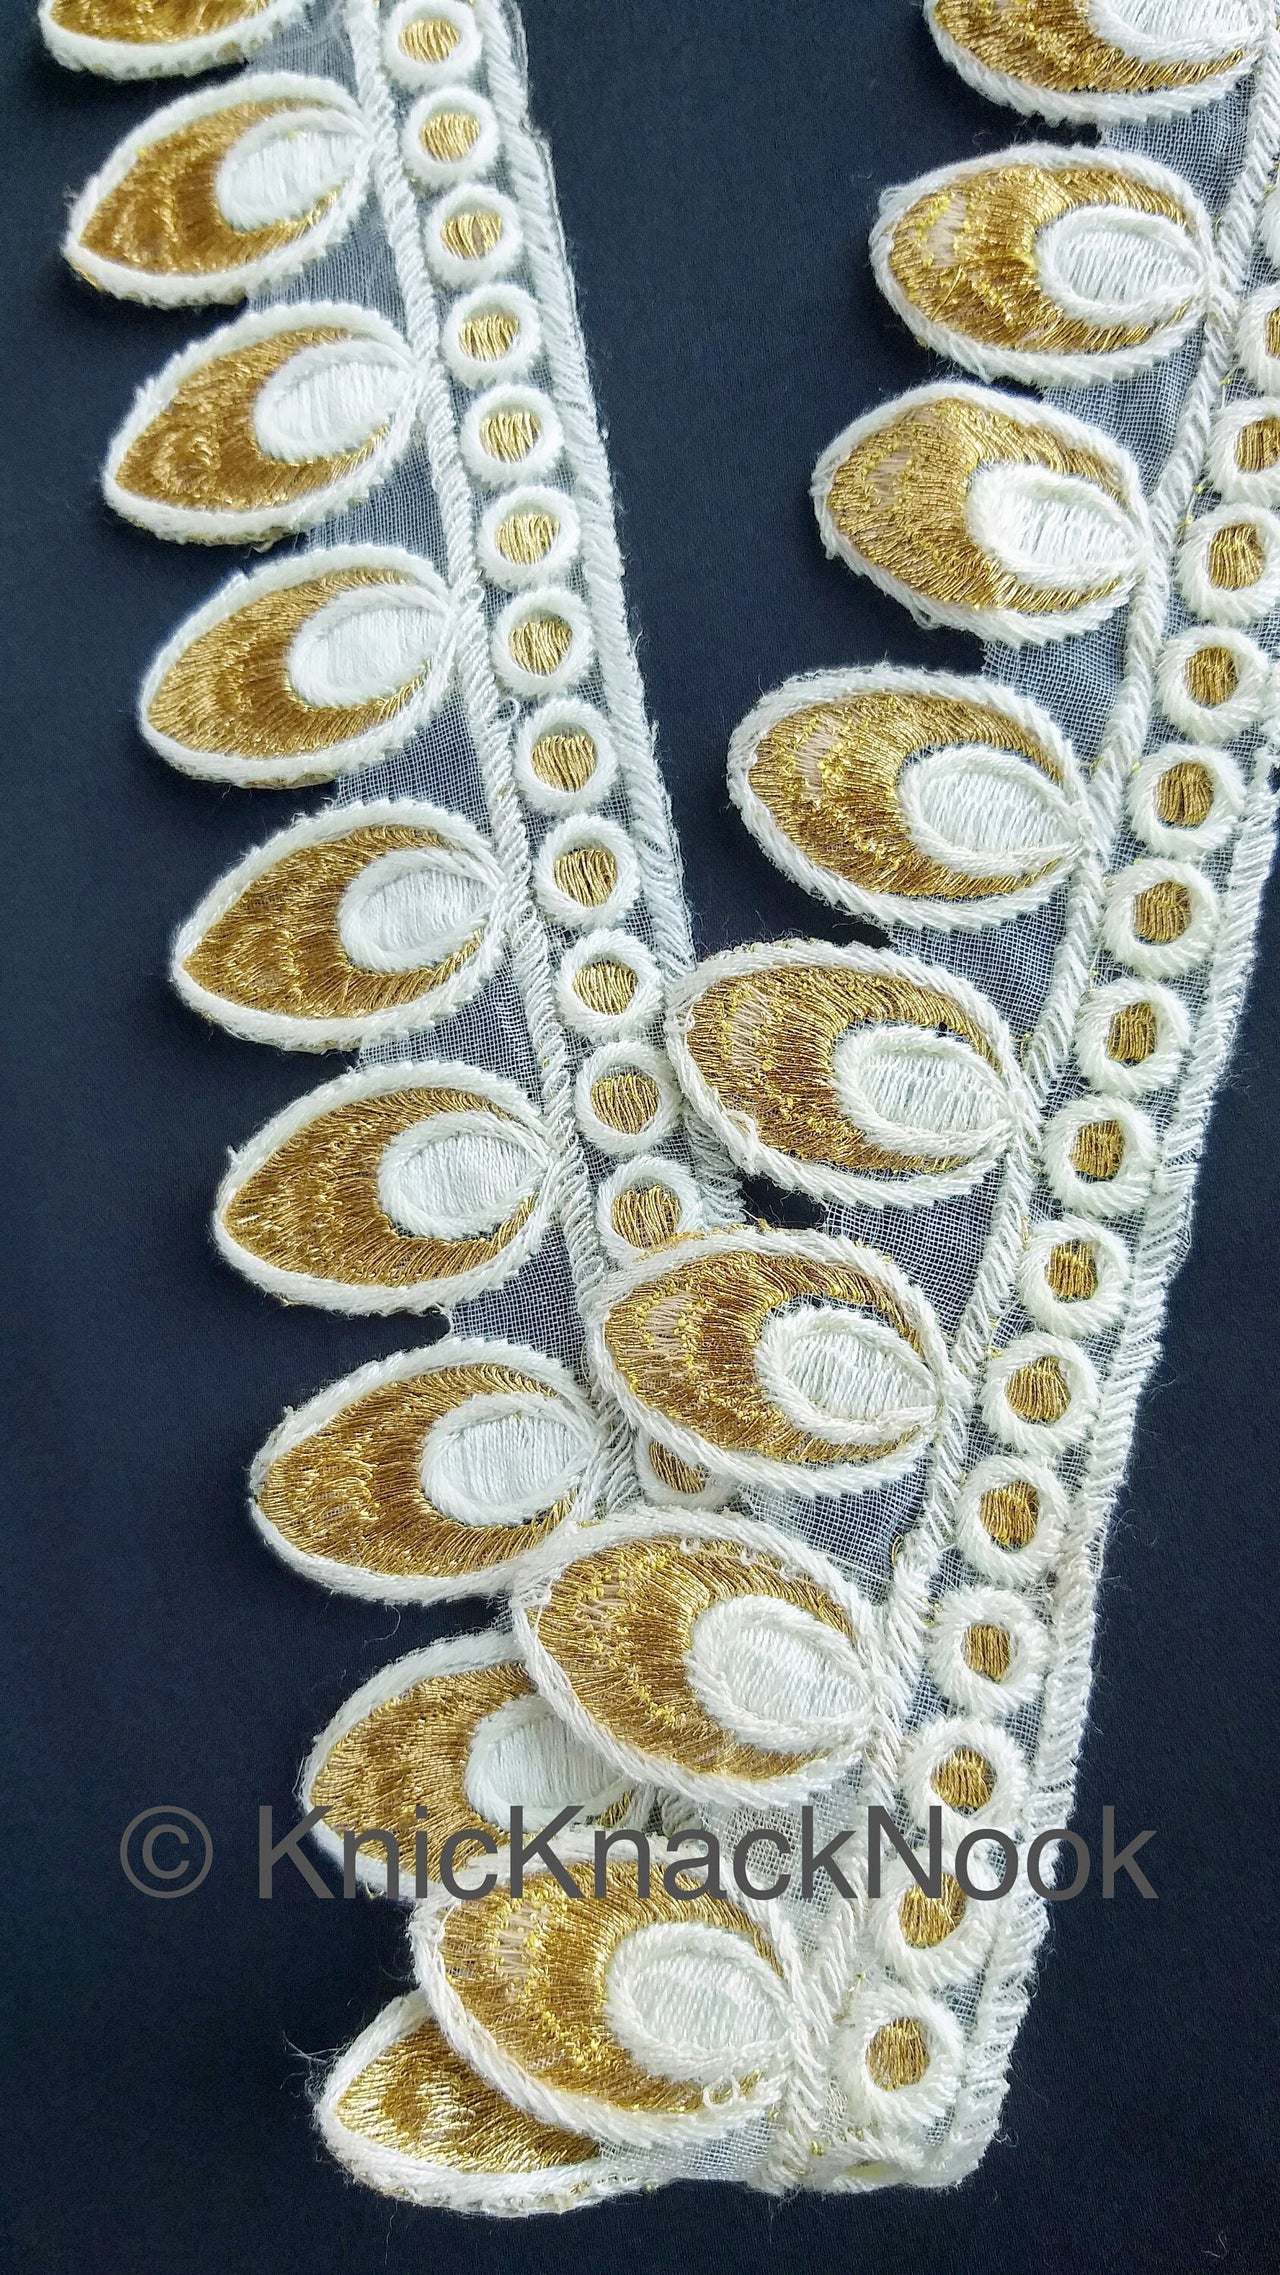 Off White Tissue Fabric Cutwork Embroidered Lace Trim With Off White / Brown and Gold Embroidery, Approx. 45mm Wide, One yard Lace